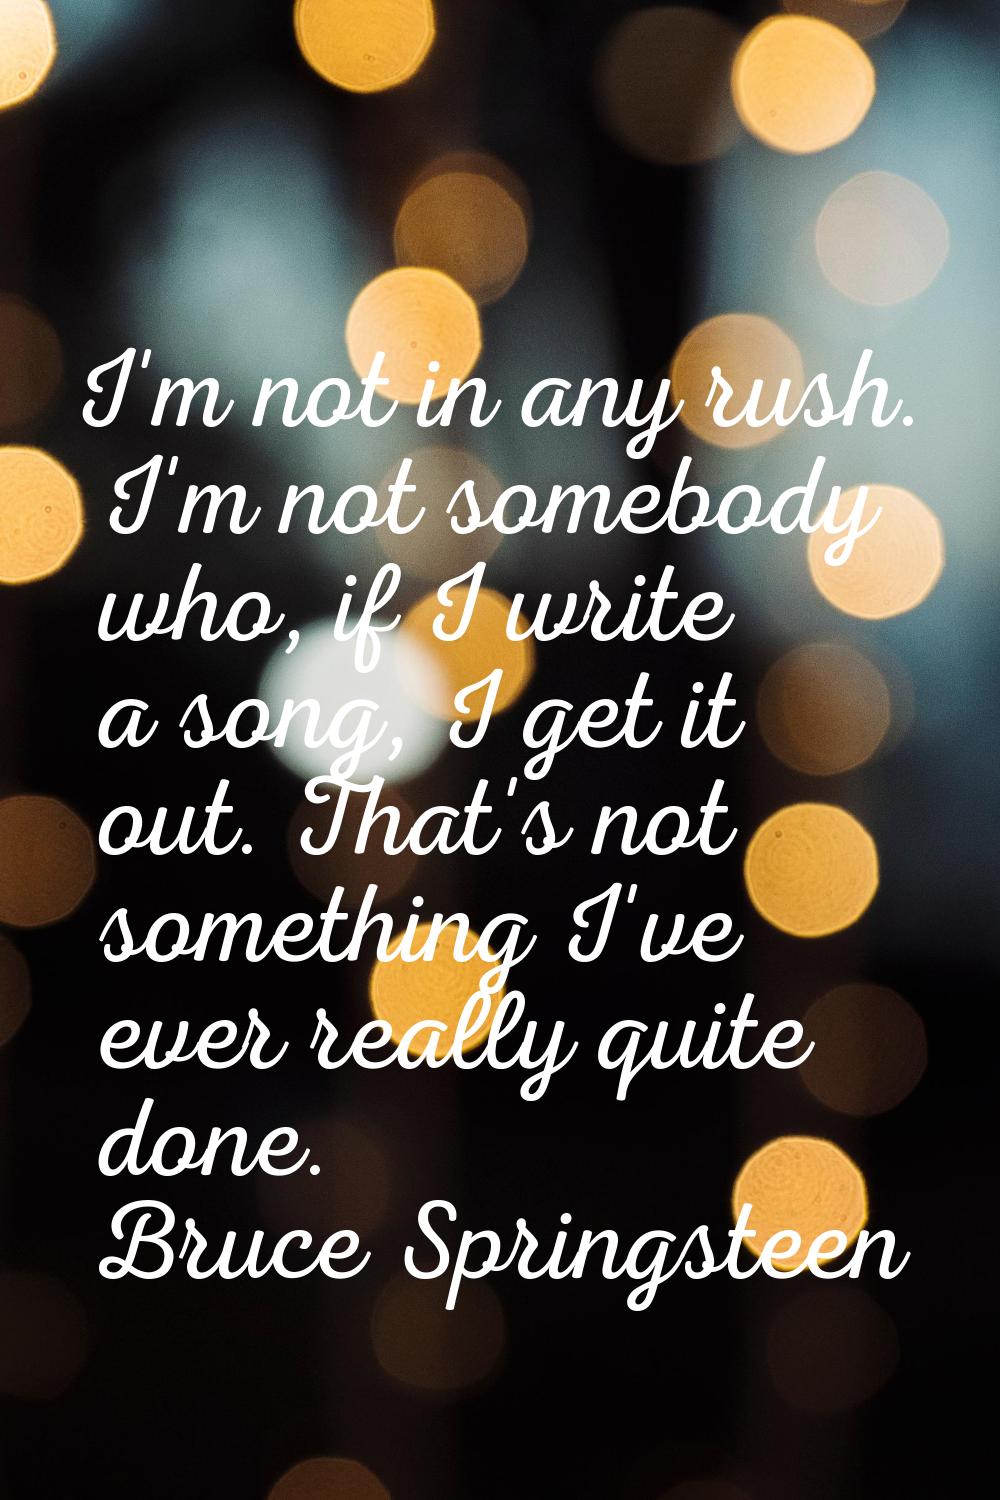 I'm not in any rush. I'm not somebody who, if I write a song, I get it out. That's not something I'